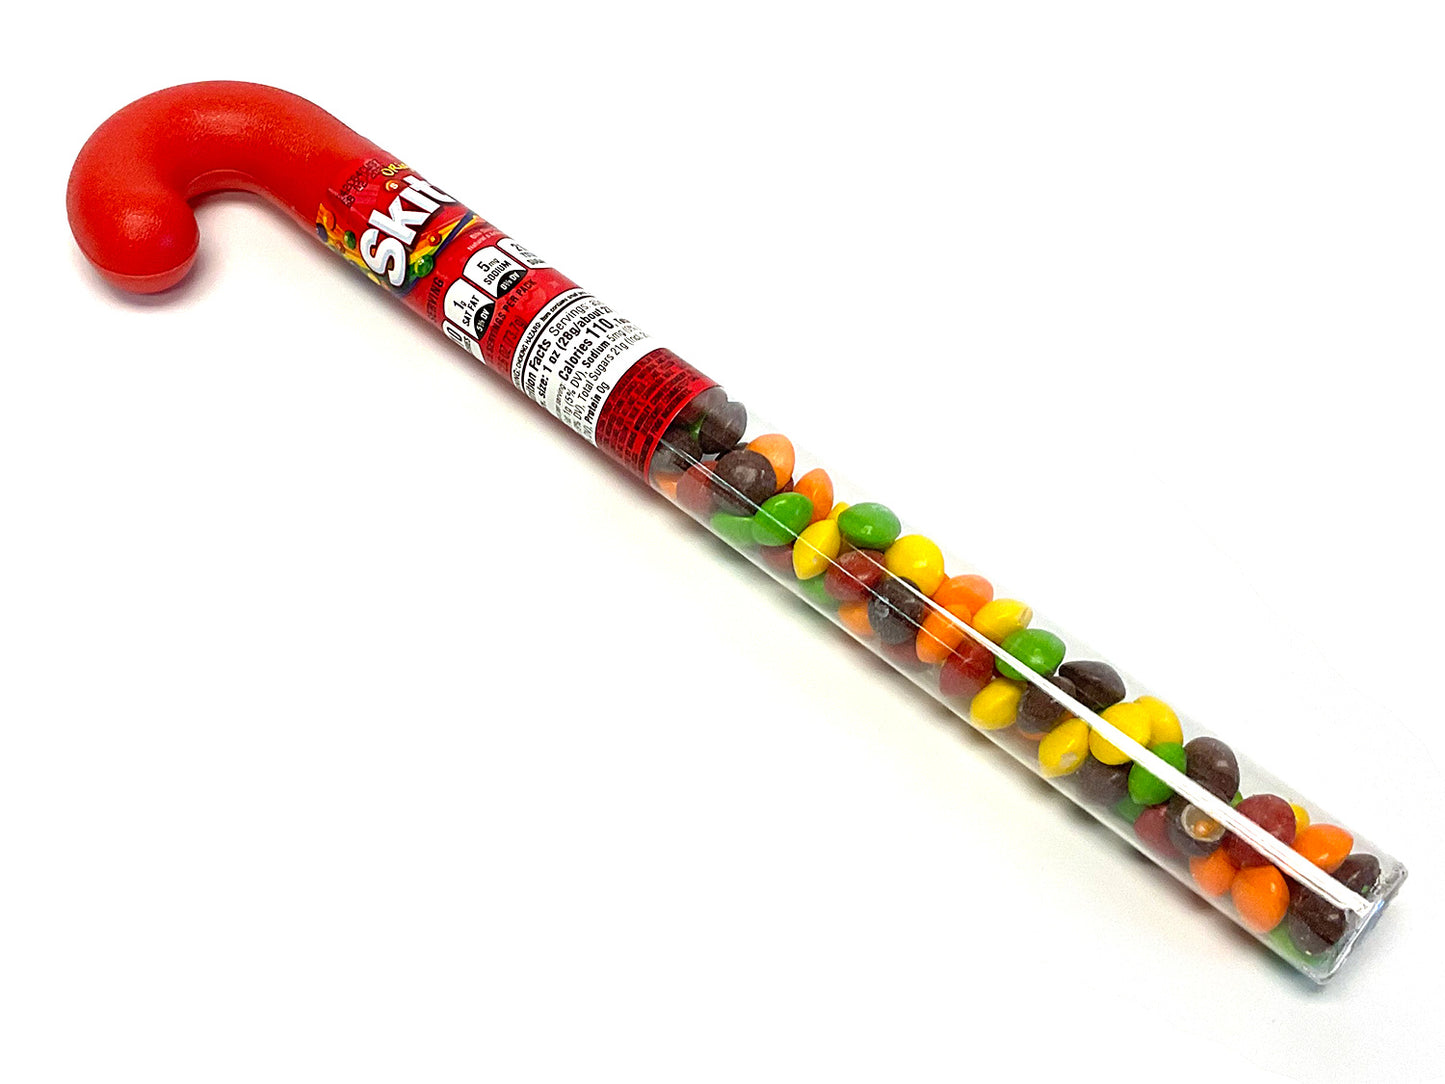 Candy Cane filled with Skittles - 12 inch